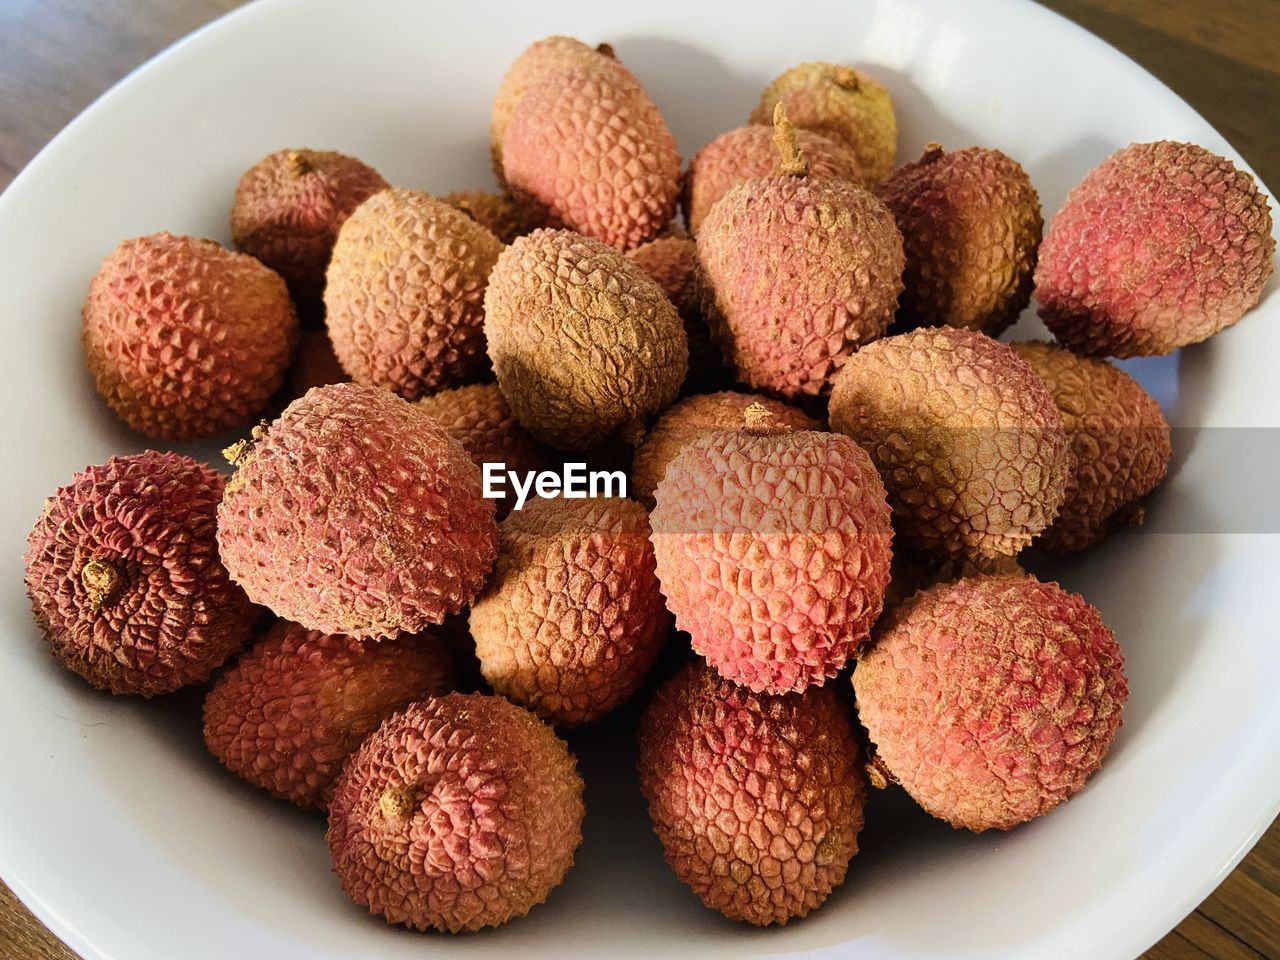 Lychee fruits 